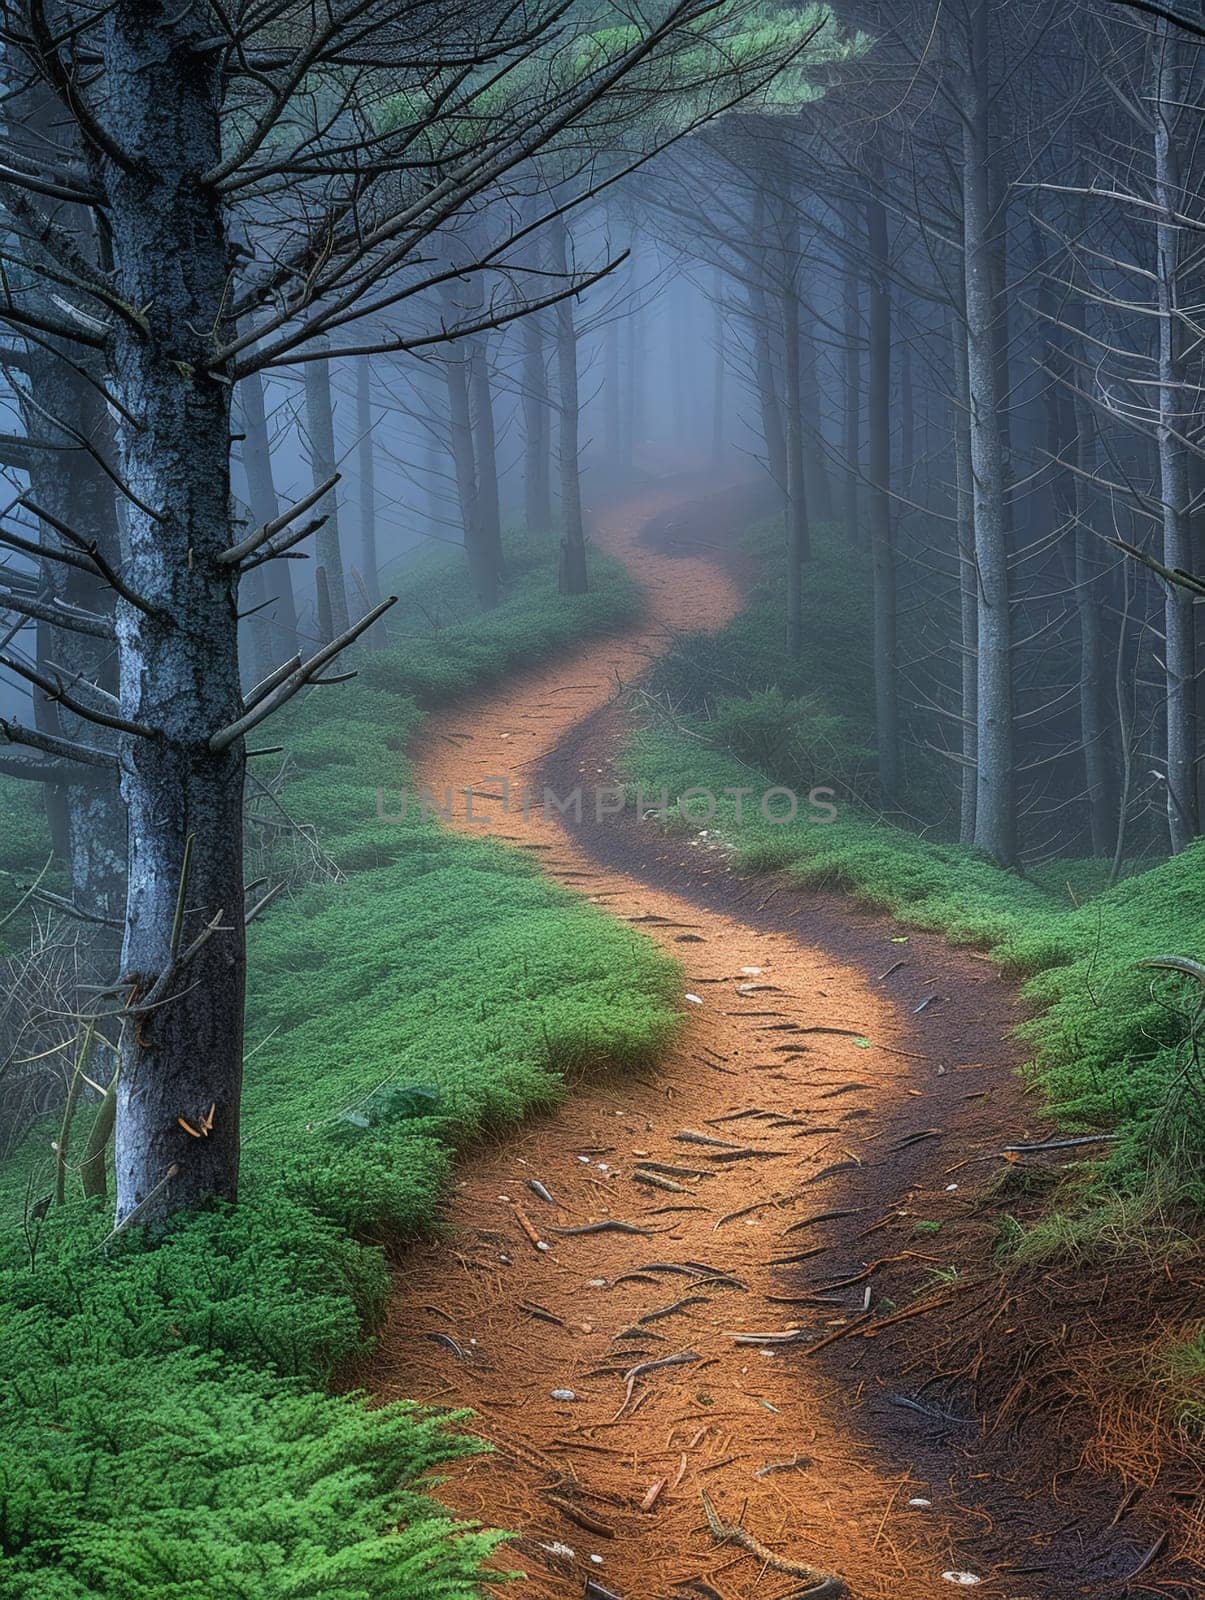 A pathway through a mystical foggy forest, inviting exploration and adventure.